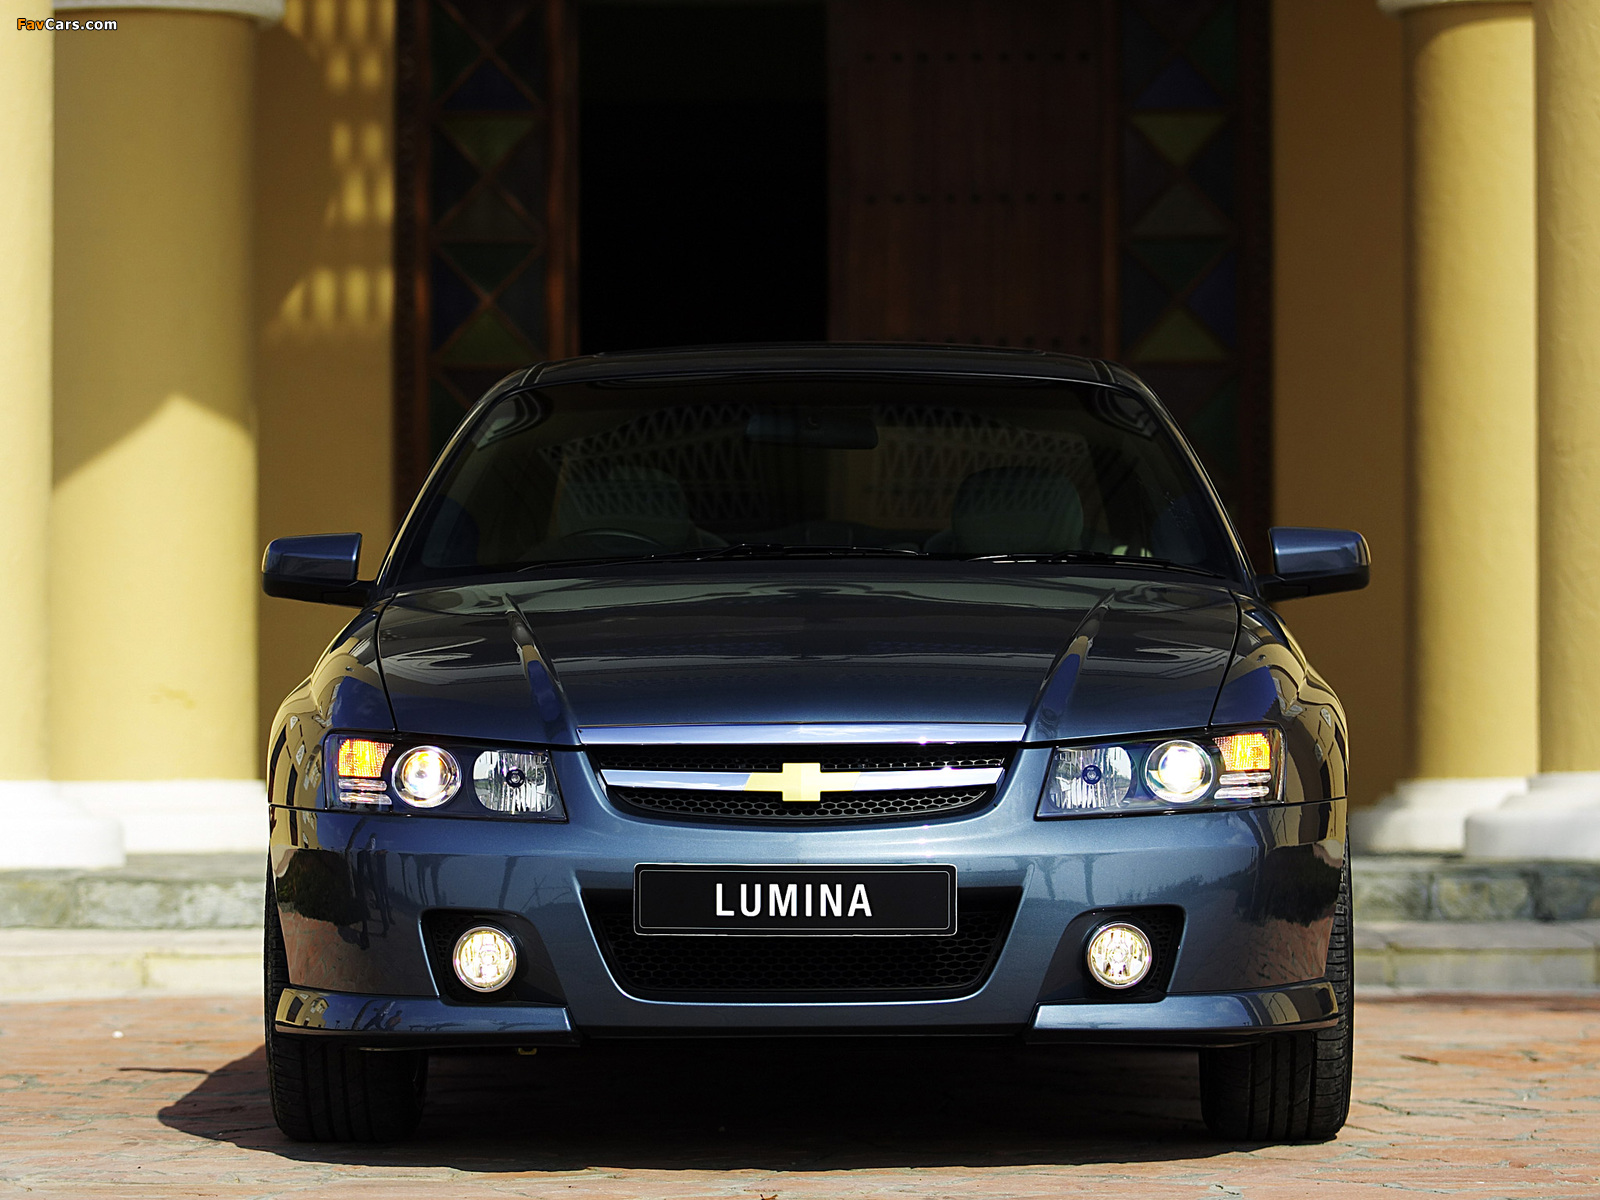 Chevrolet Lumina Royale 2006 pictures (1600 x 1200)